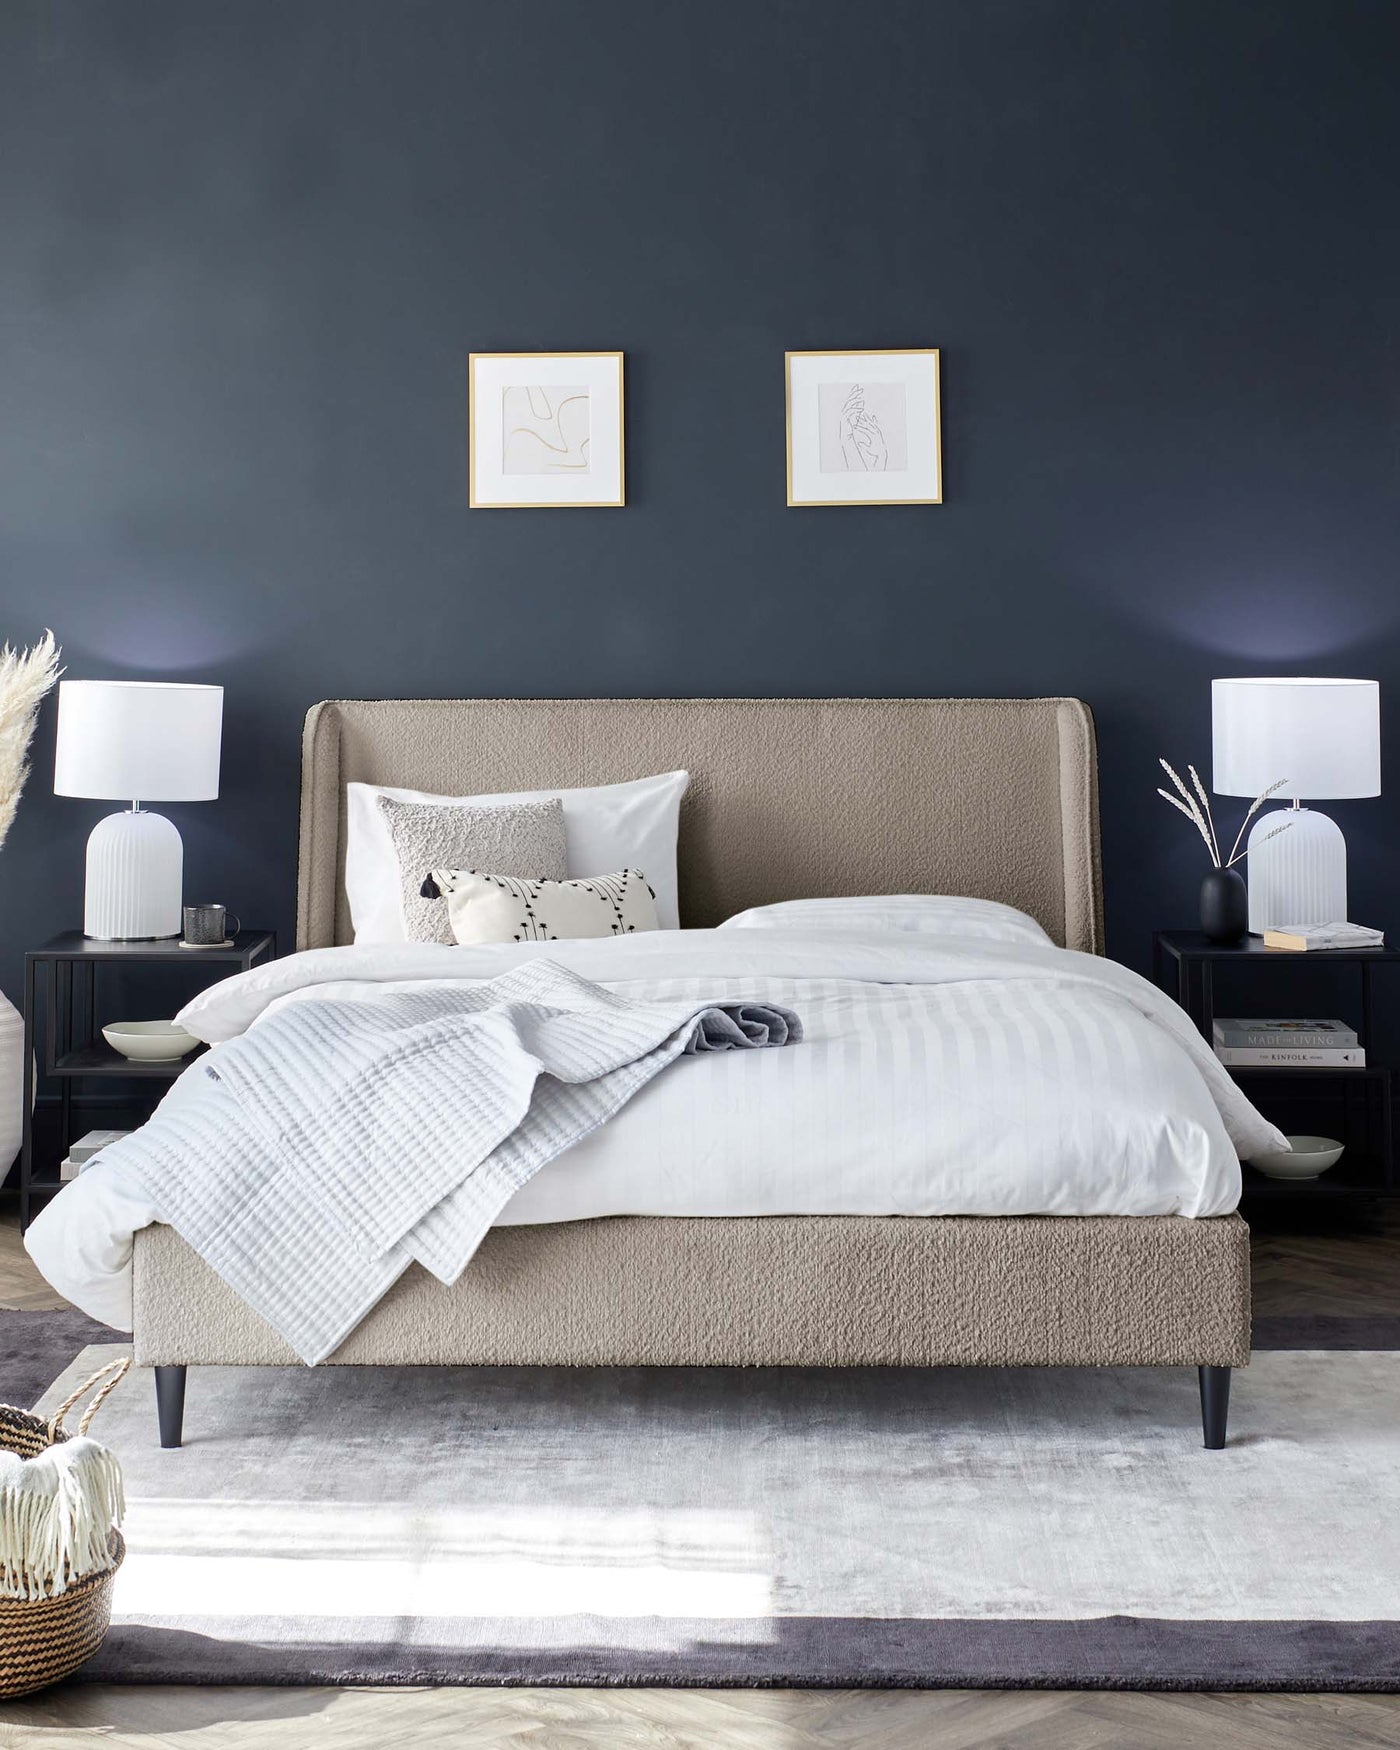 Modern bedroom furniture set featuring a beige upholstered platform bed with a high headboard and angled legs, flanked by two black wooden nightstands with table lamps, all displayed on a plush grey gradient area rug.